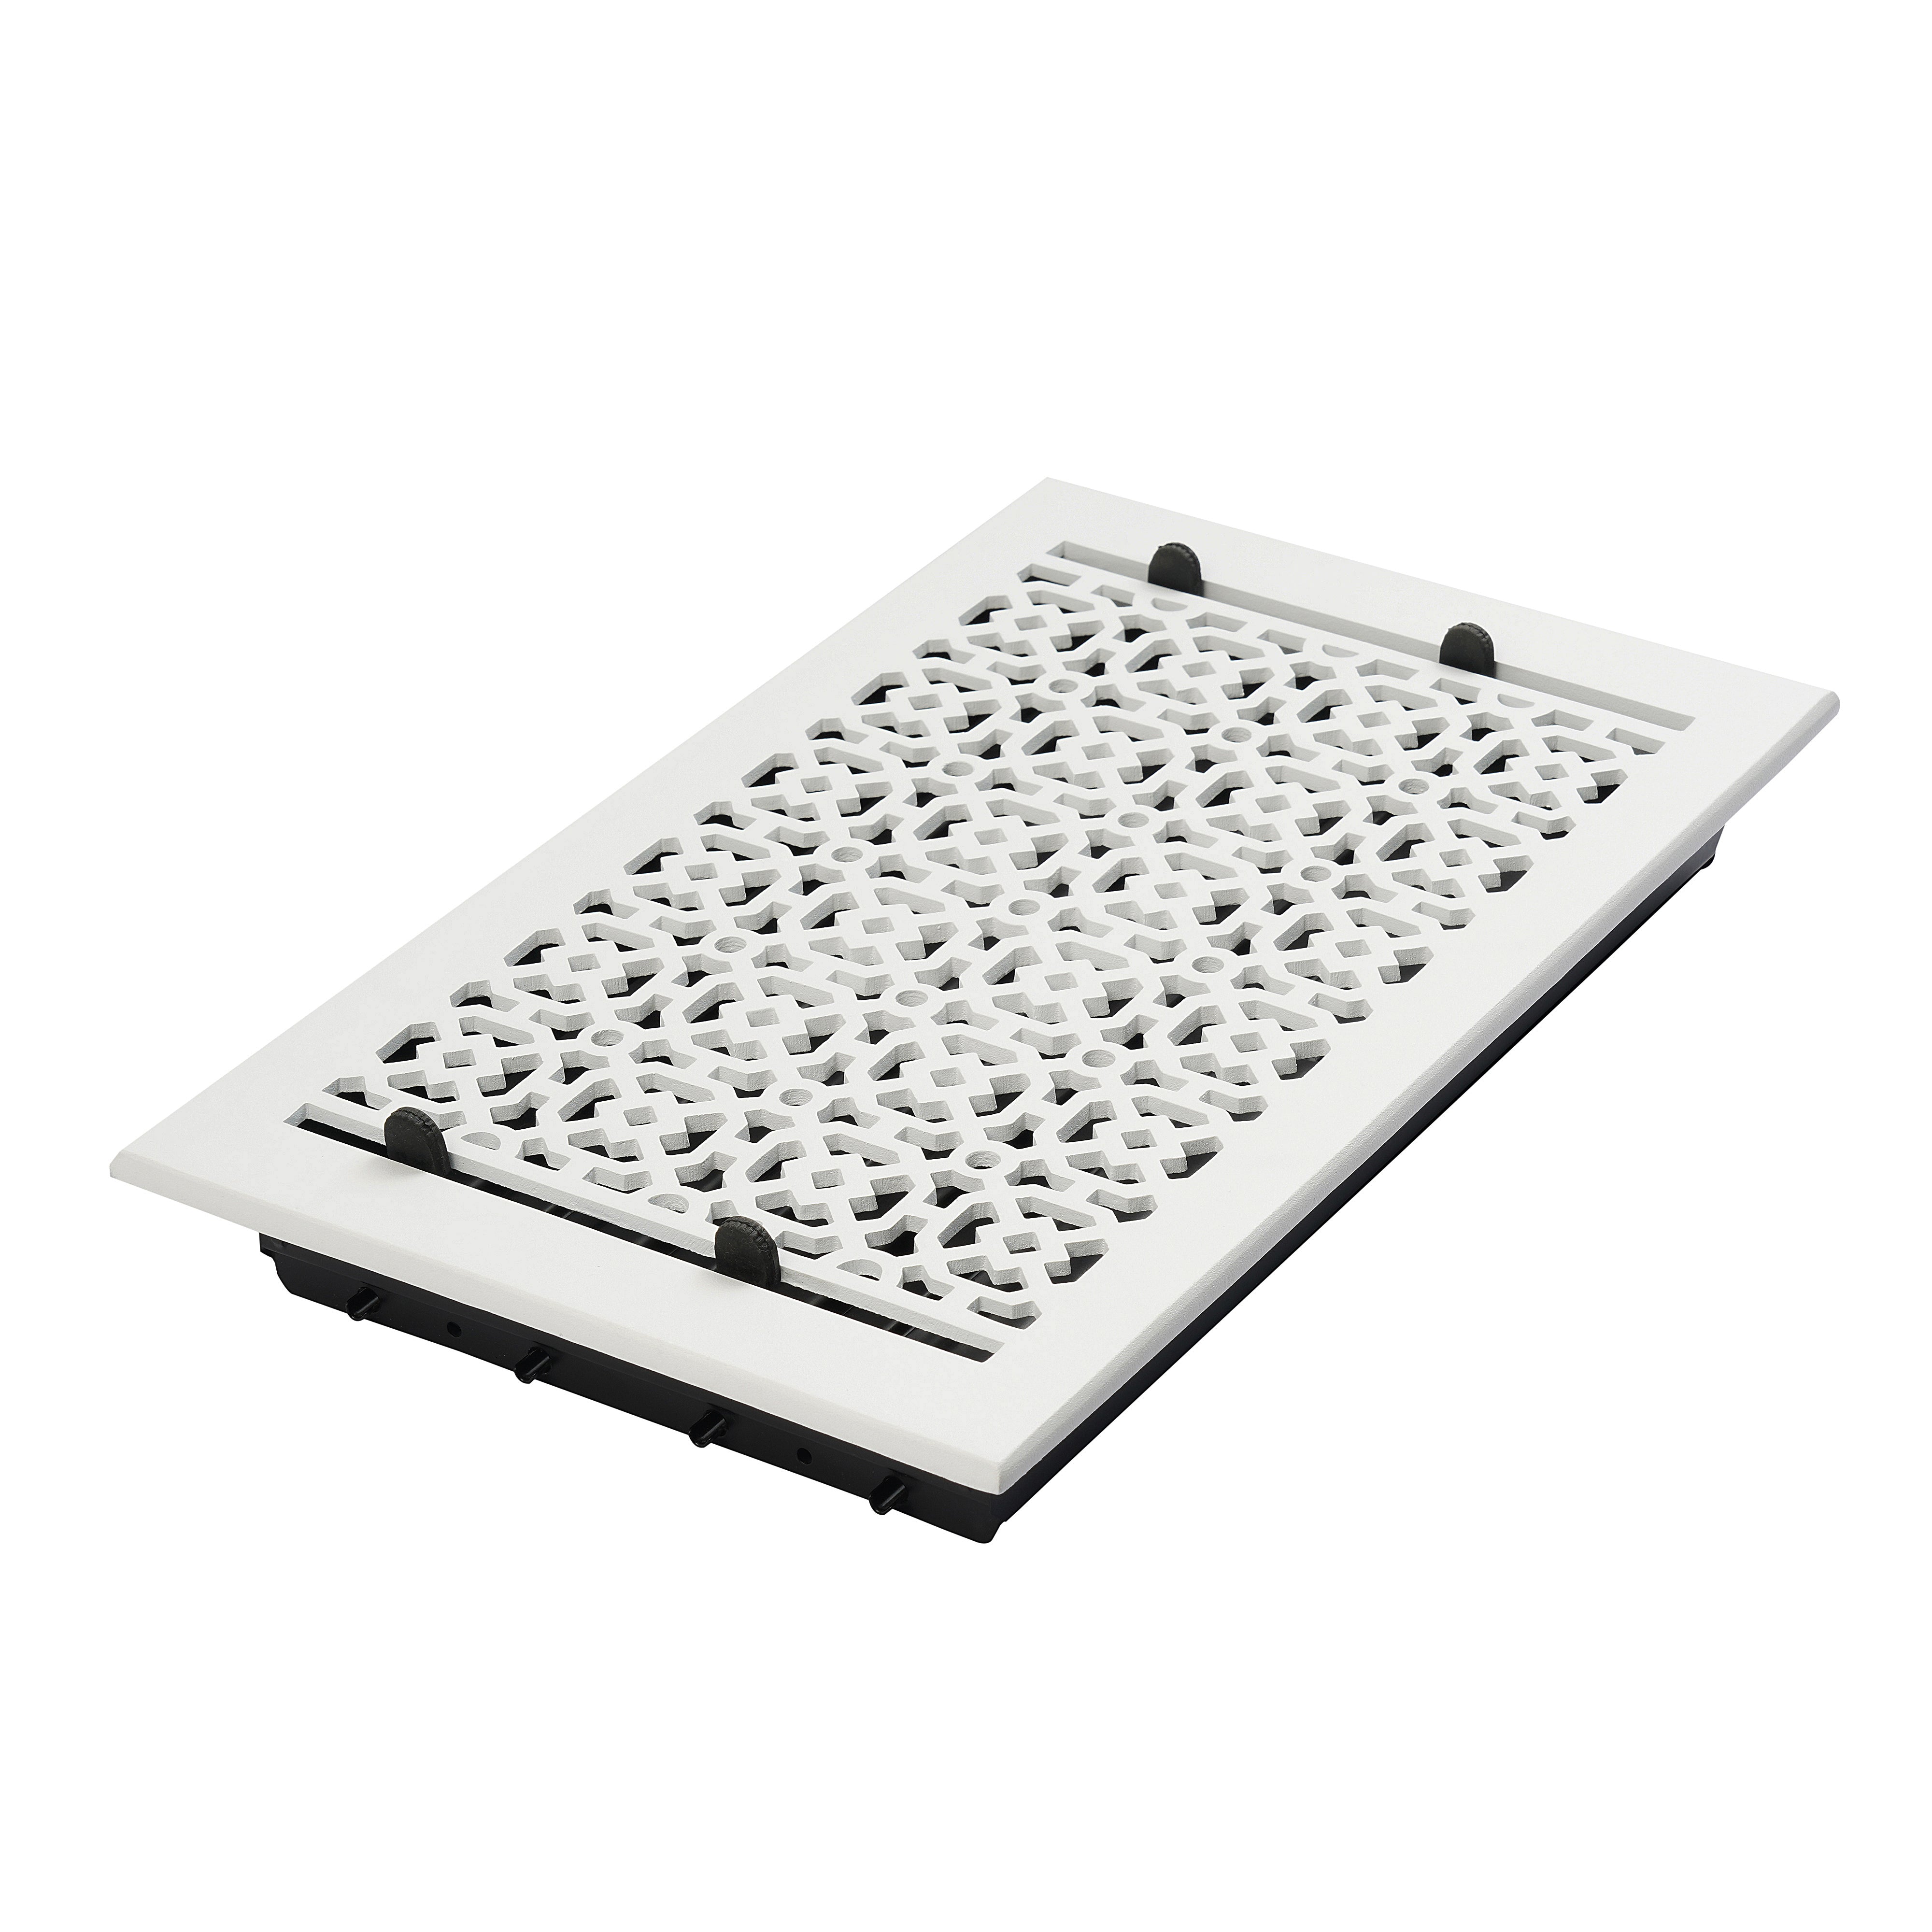 Achtek Air Supply Vent 8"x 10" Duct Opening (Overall 9-1/2"x 11-1/2") Solid Cast Aluminium Register Cover | Powder Coated